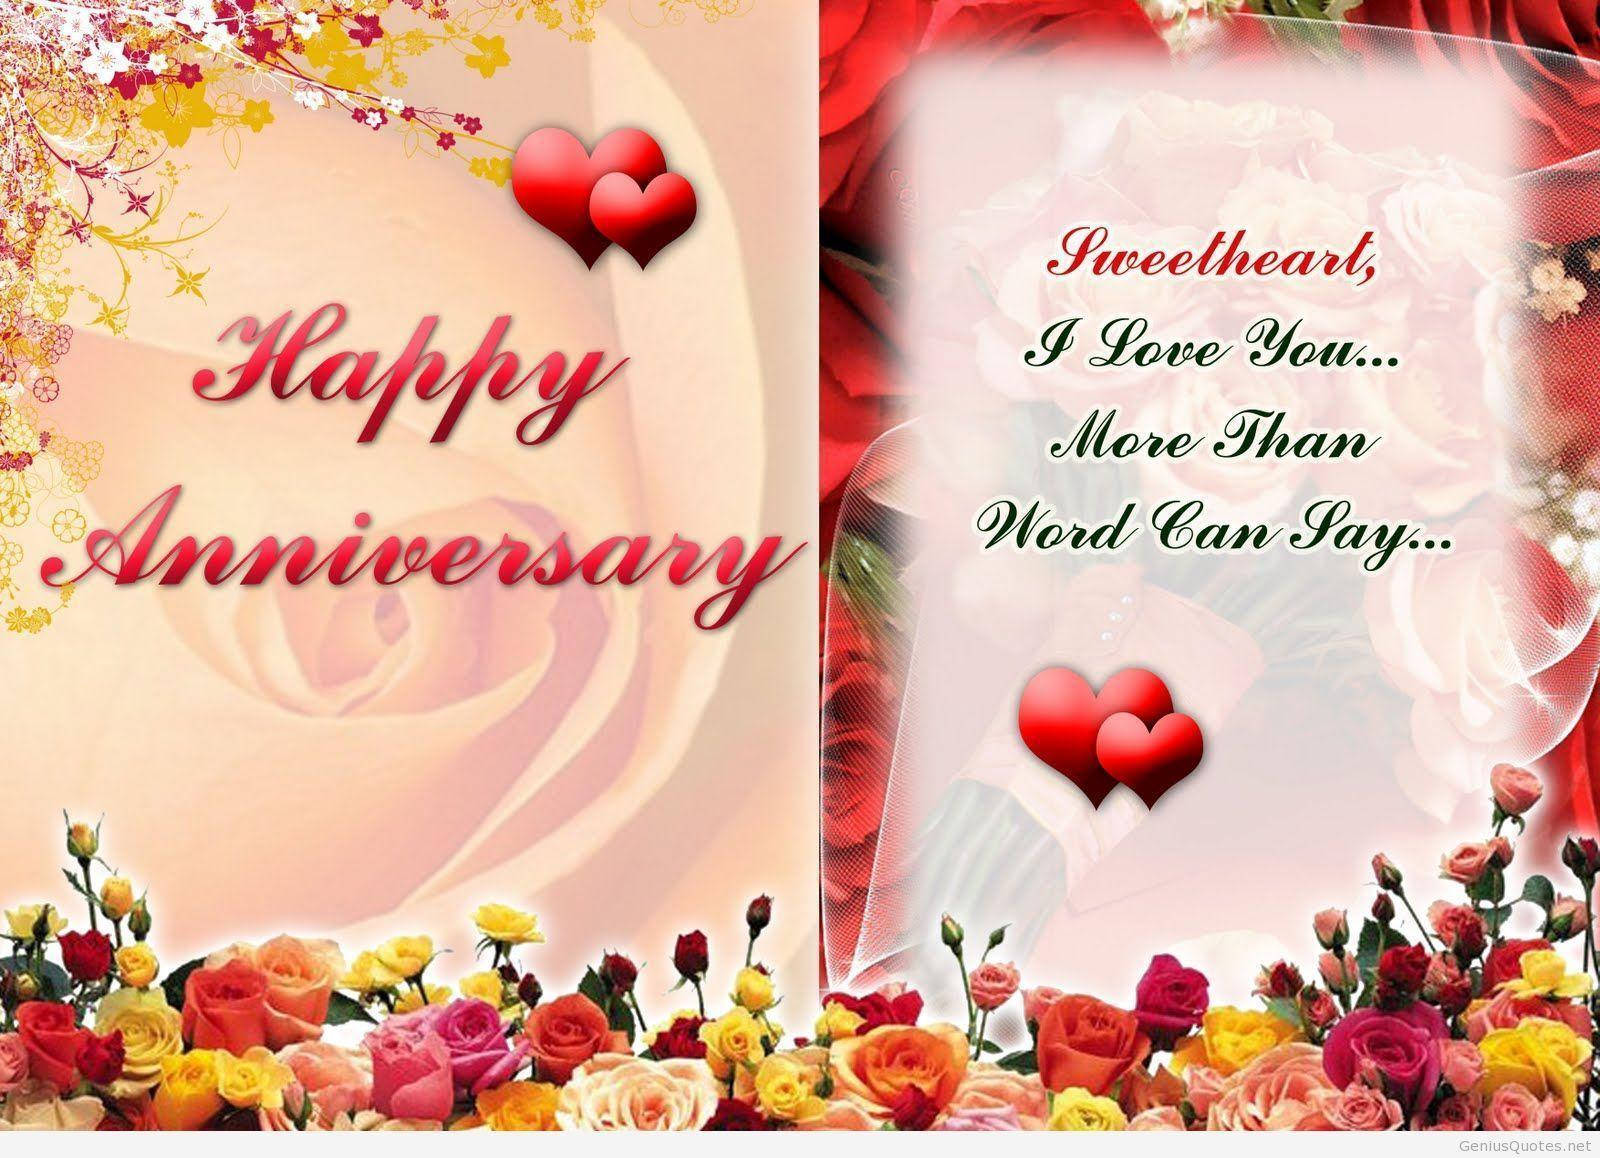 Happy Anniversary Floral Greeting Card Wallpaper